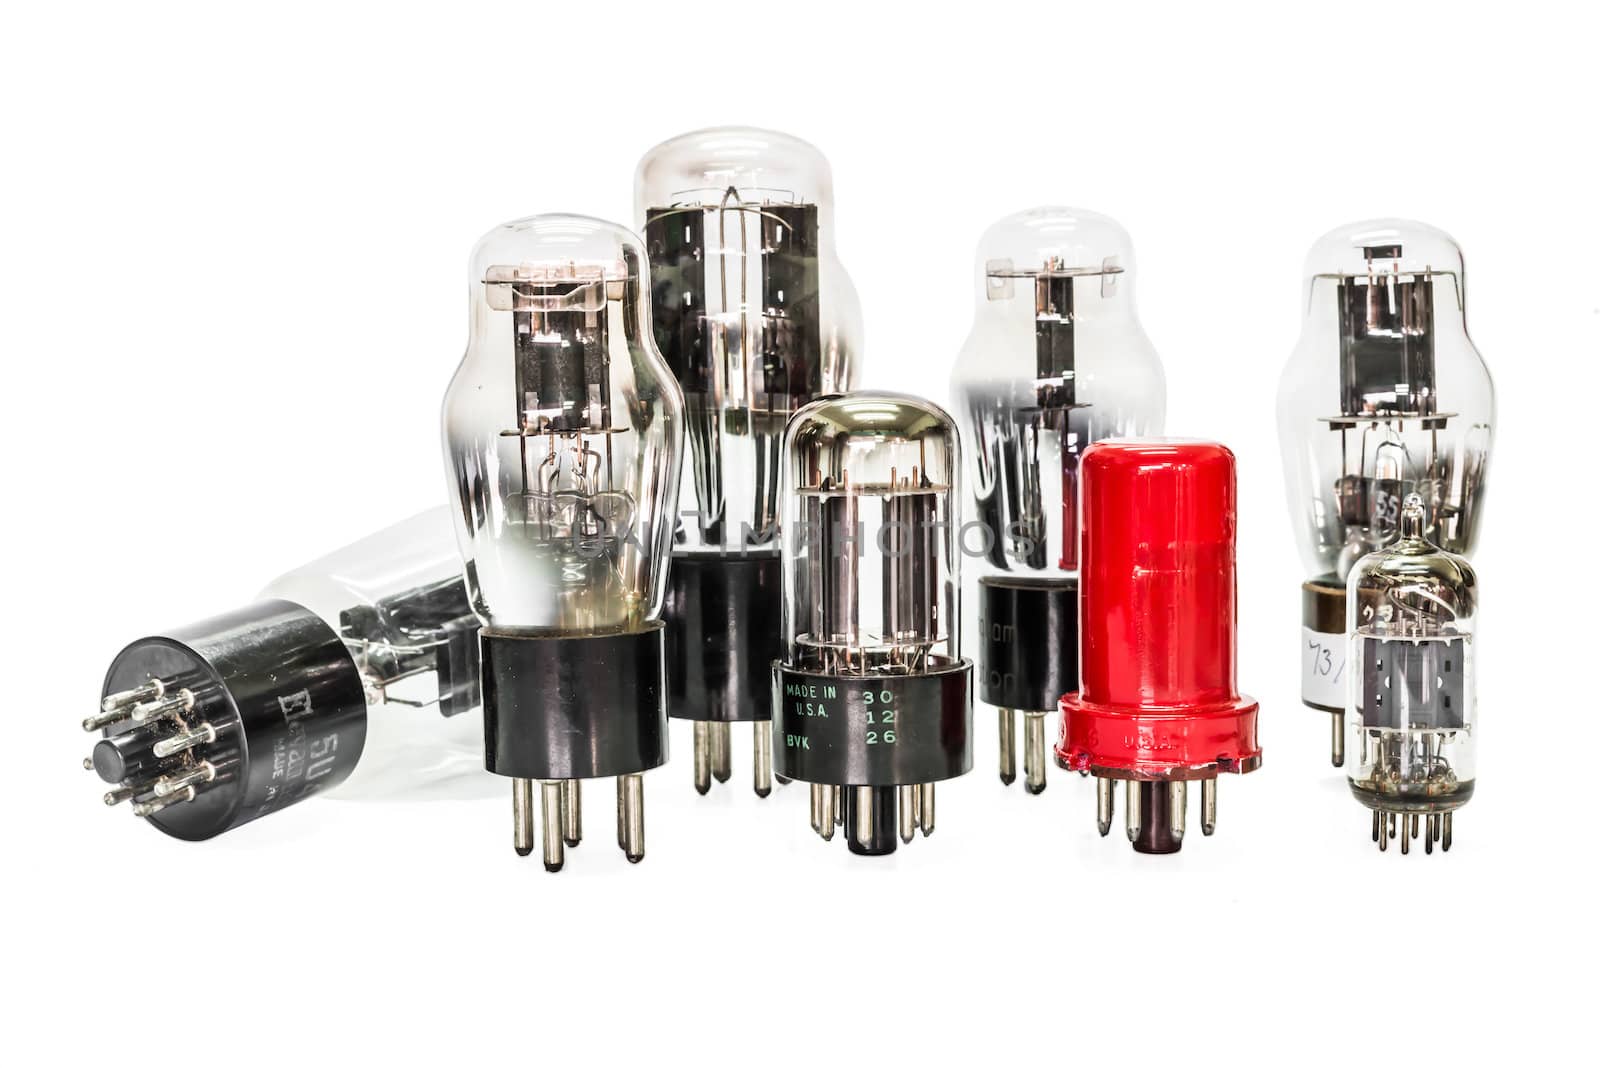 Vacuum electronic preamplifier tubes by wmitrmatr